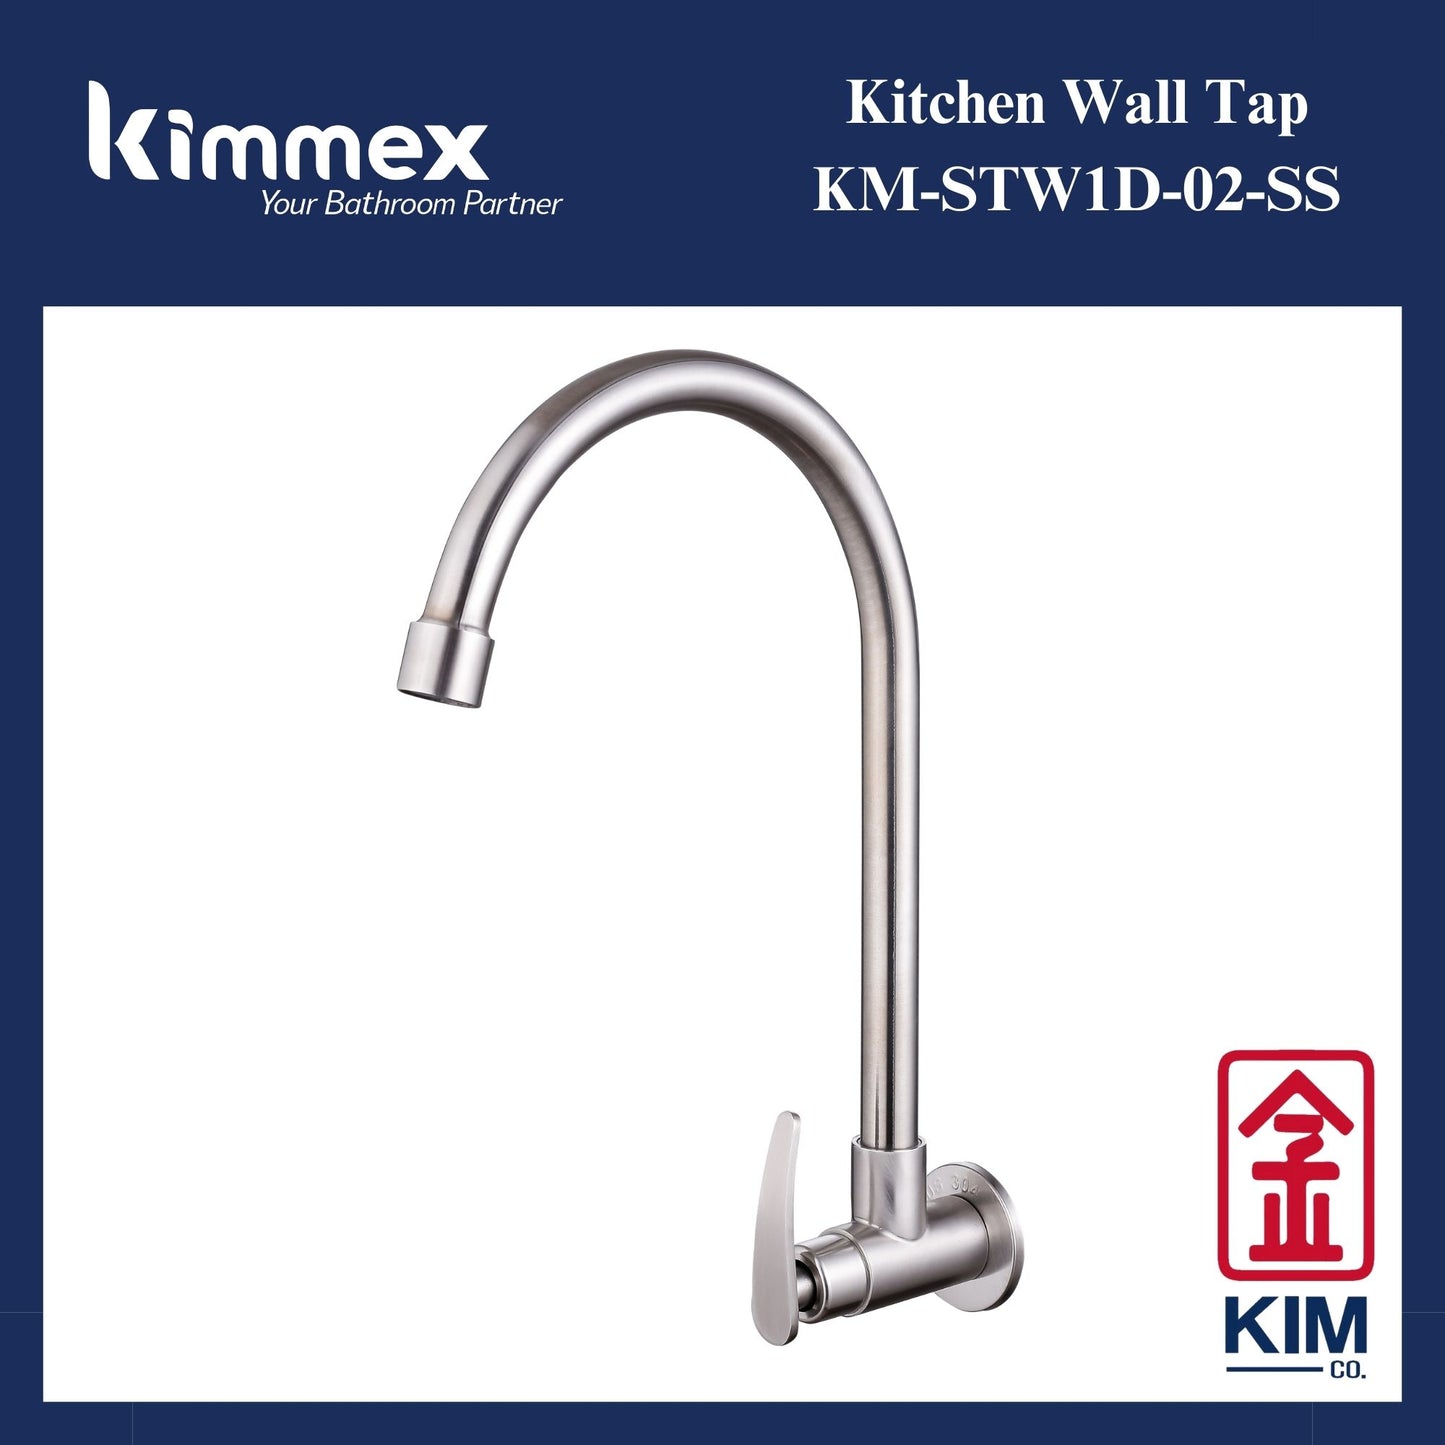 kimmex Stainless Steel 304 Wall Mounted Kitchen Sink Tap (KM-STW1D-02-SS)